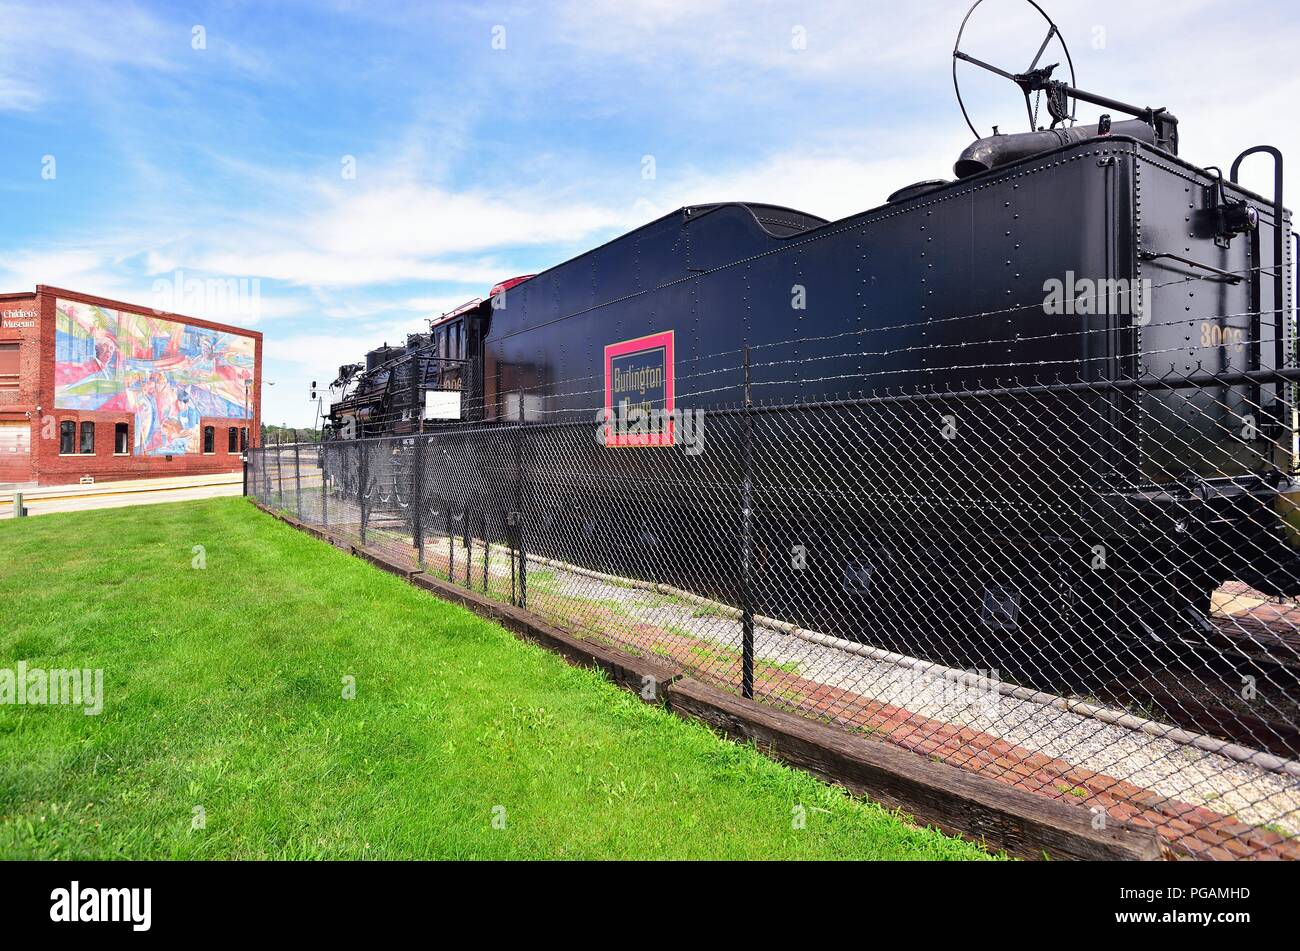 Galesburg, Illinois, USA. A former Chicago, Burlington & Quincy Railroad steam locomotive on display at the Galesburg Railroad Museum. Stock Photo